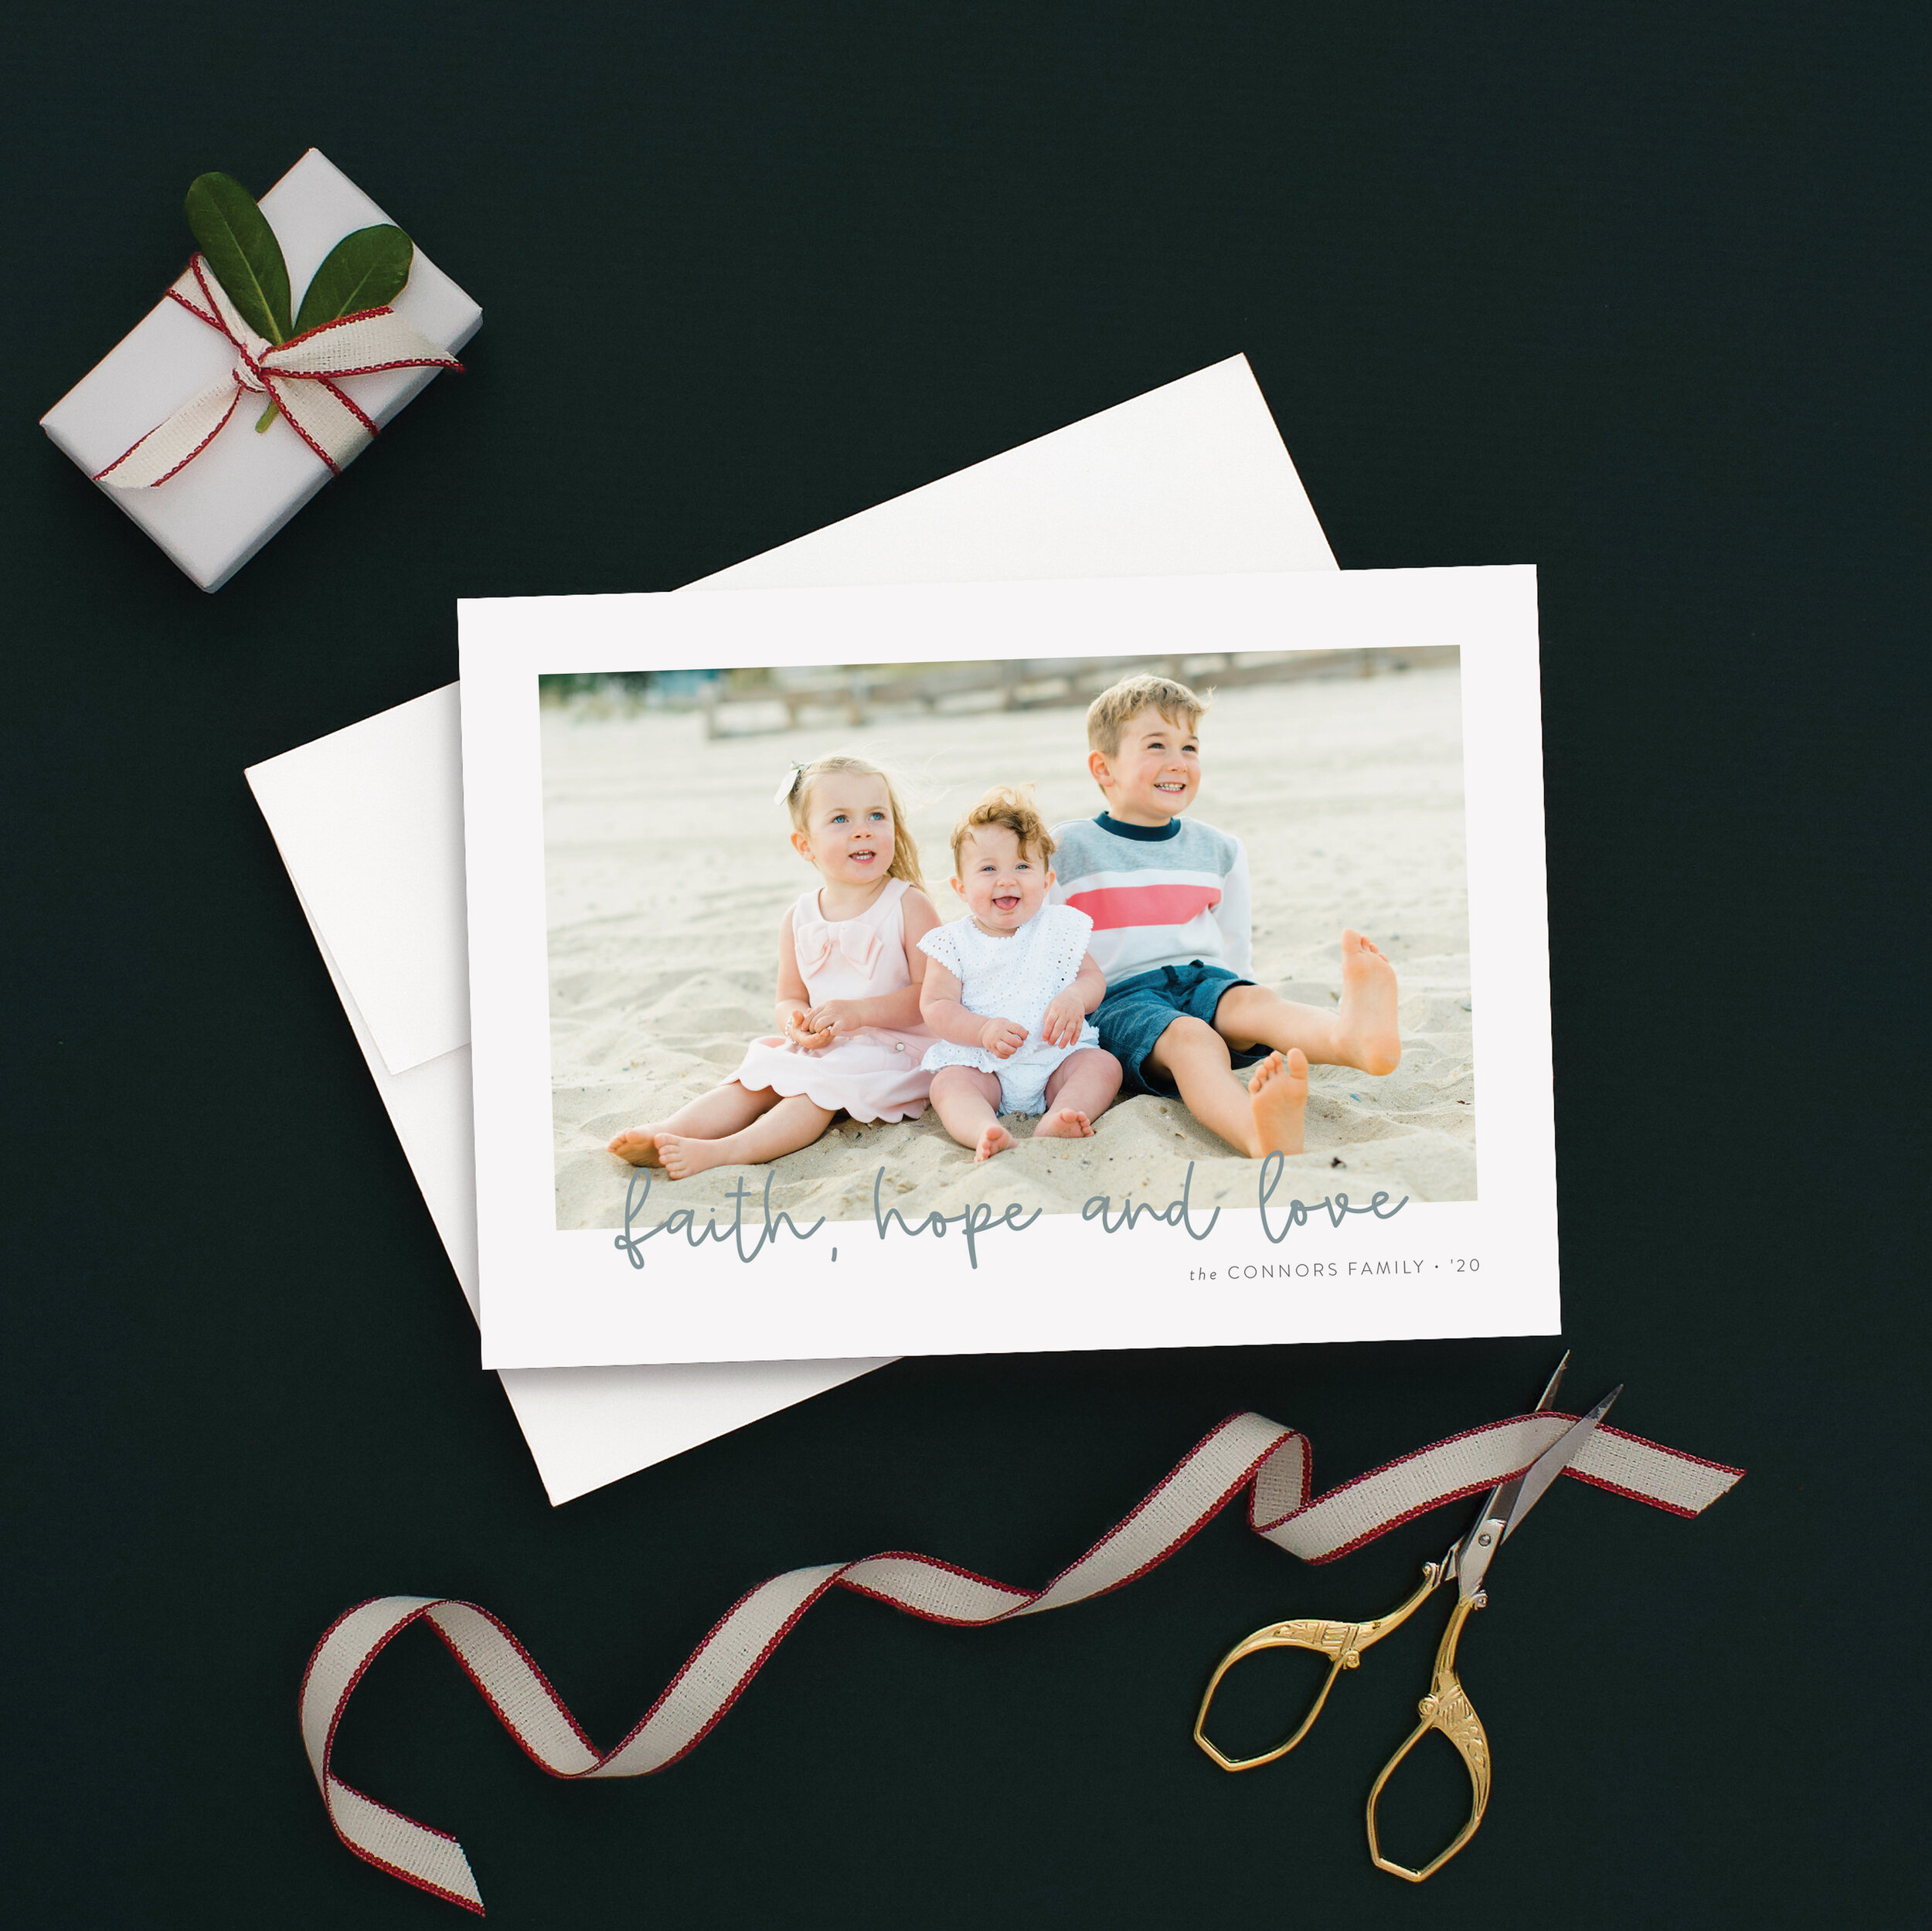 Jula Paper Co | 2020 Holiday Card Collection | www.julapaper.co